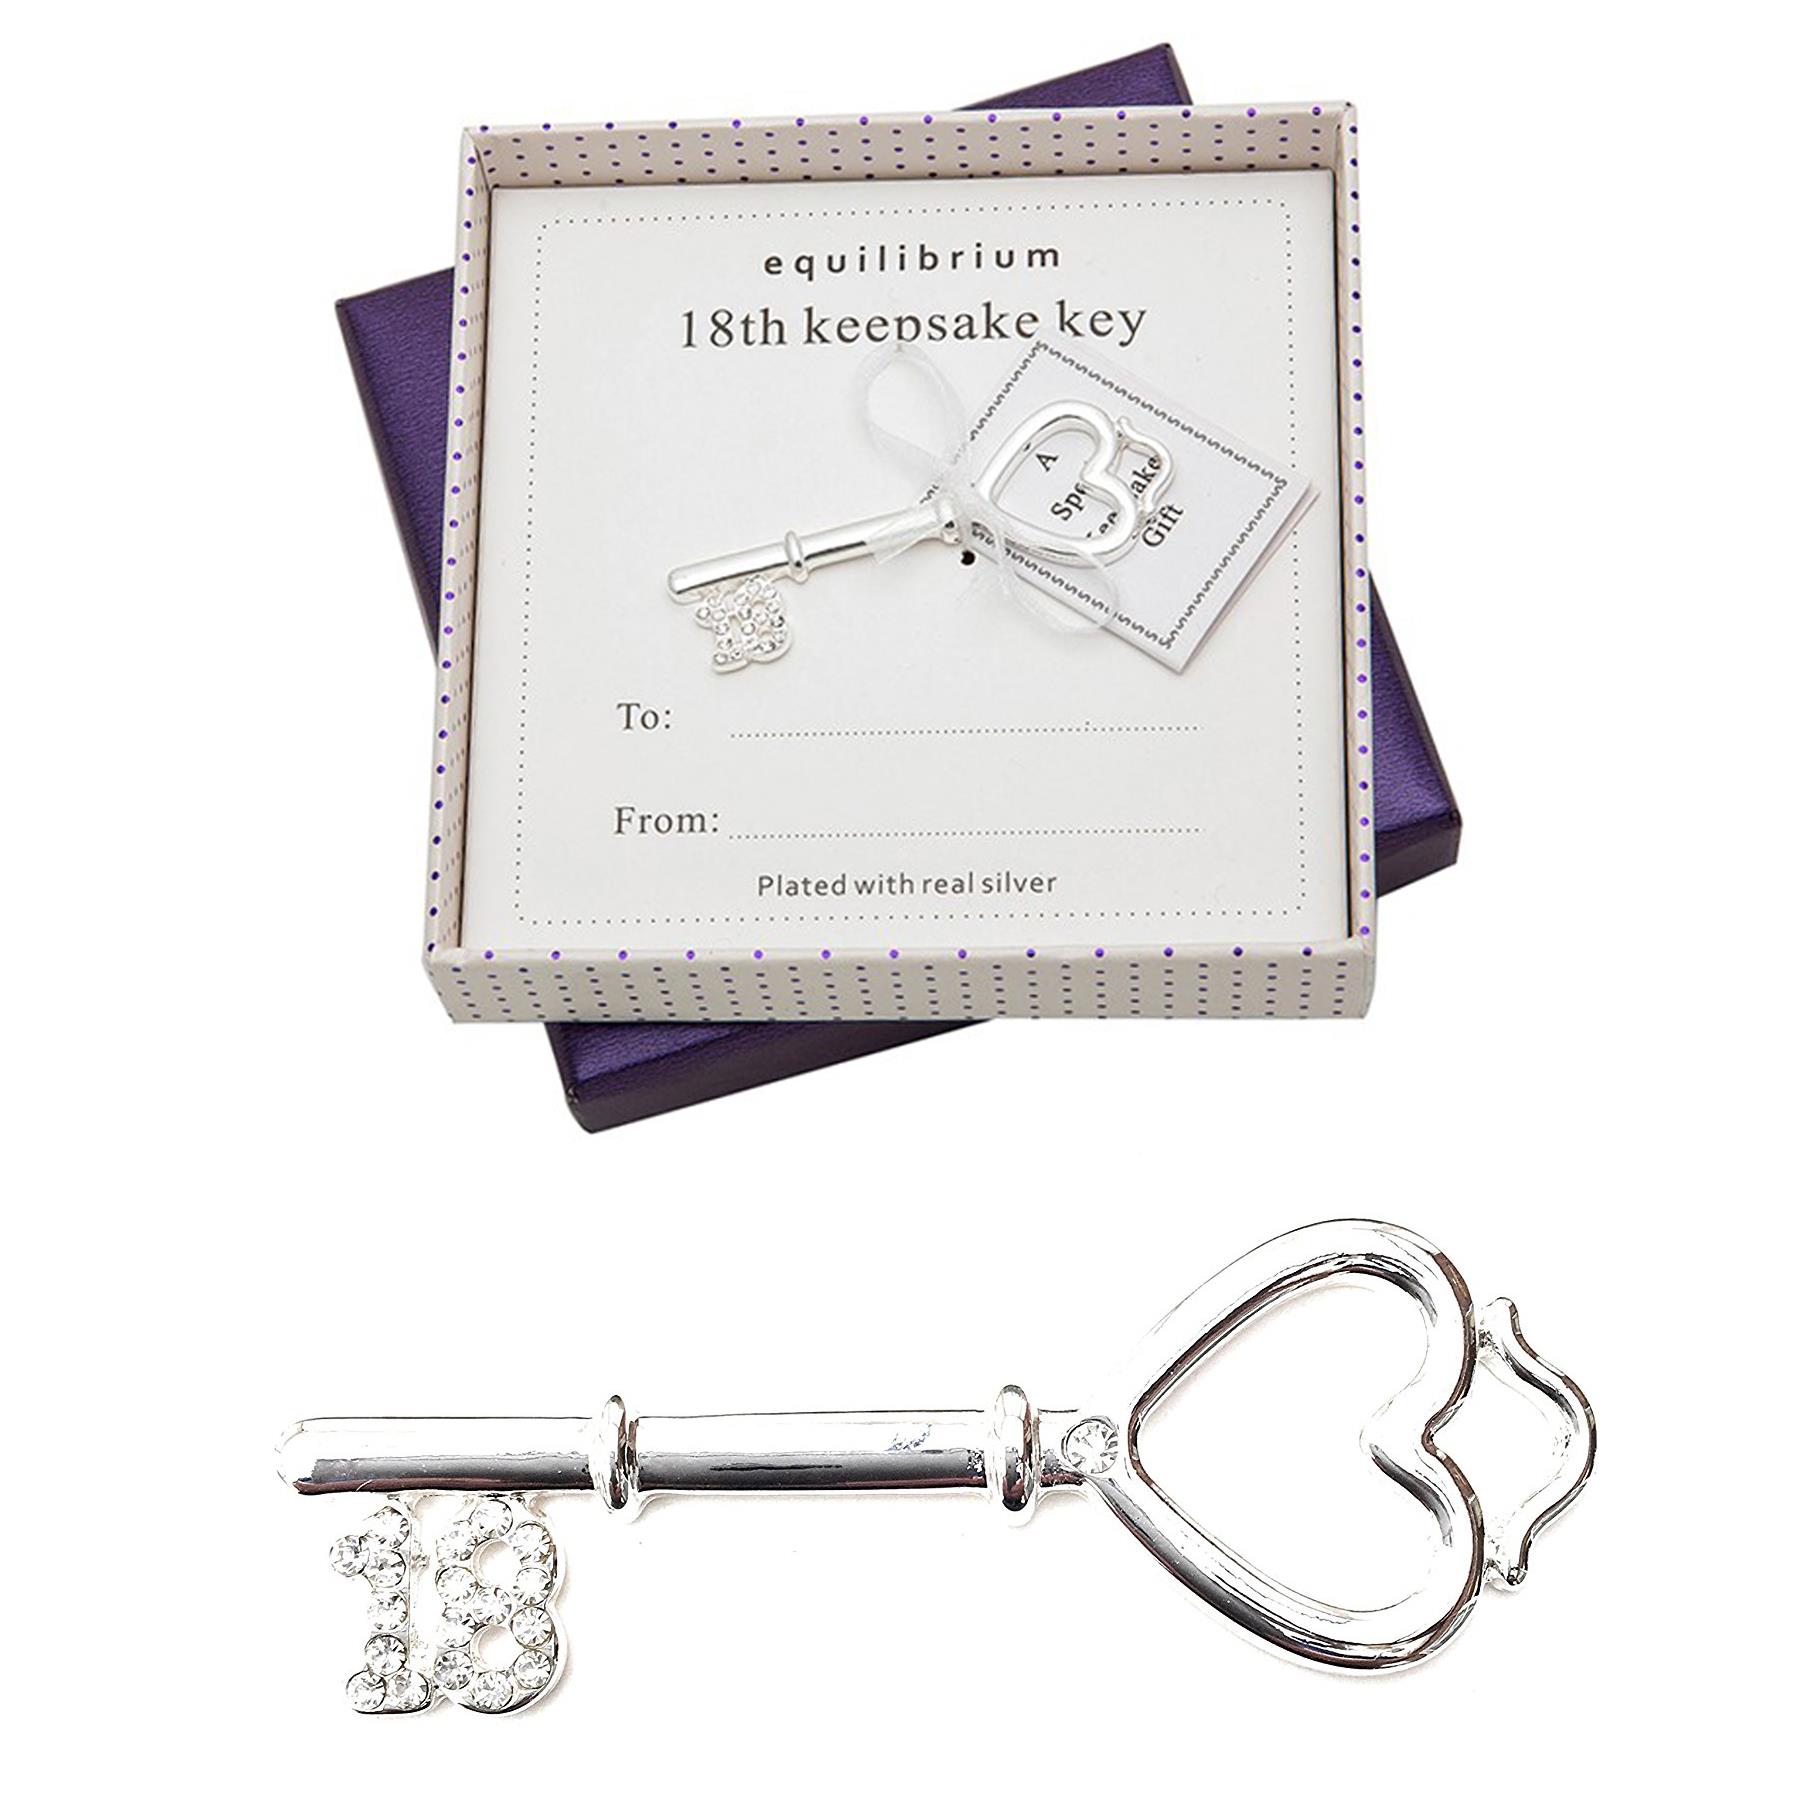 Equilibrium Silver Plated Special Birthday Keepsake Key - 18th